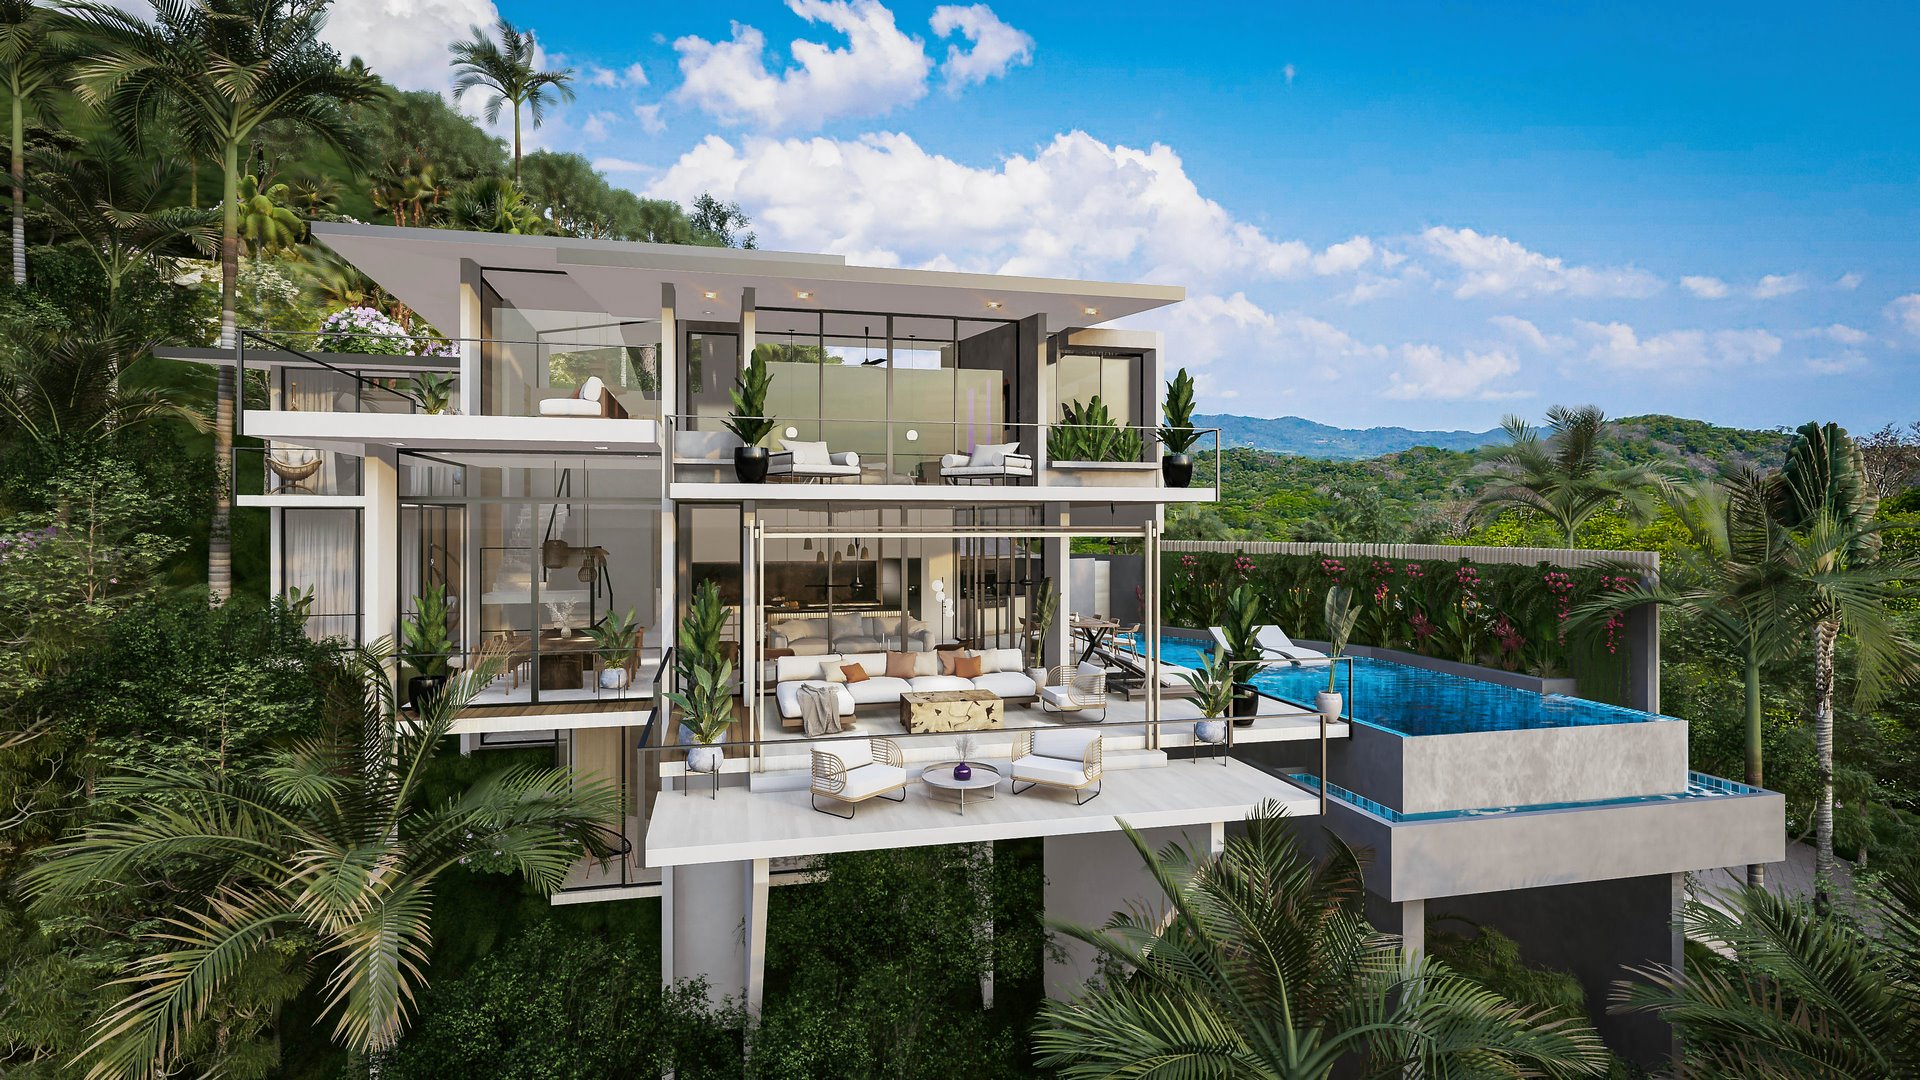 10216-Brand new home for sale in Costa Rica complemented with ocean and nature views